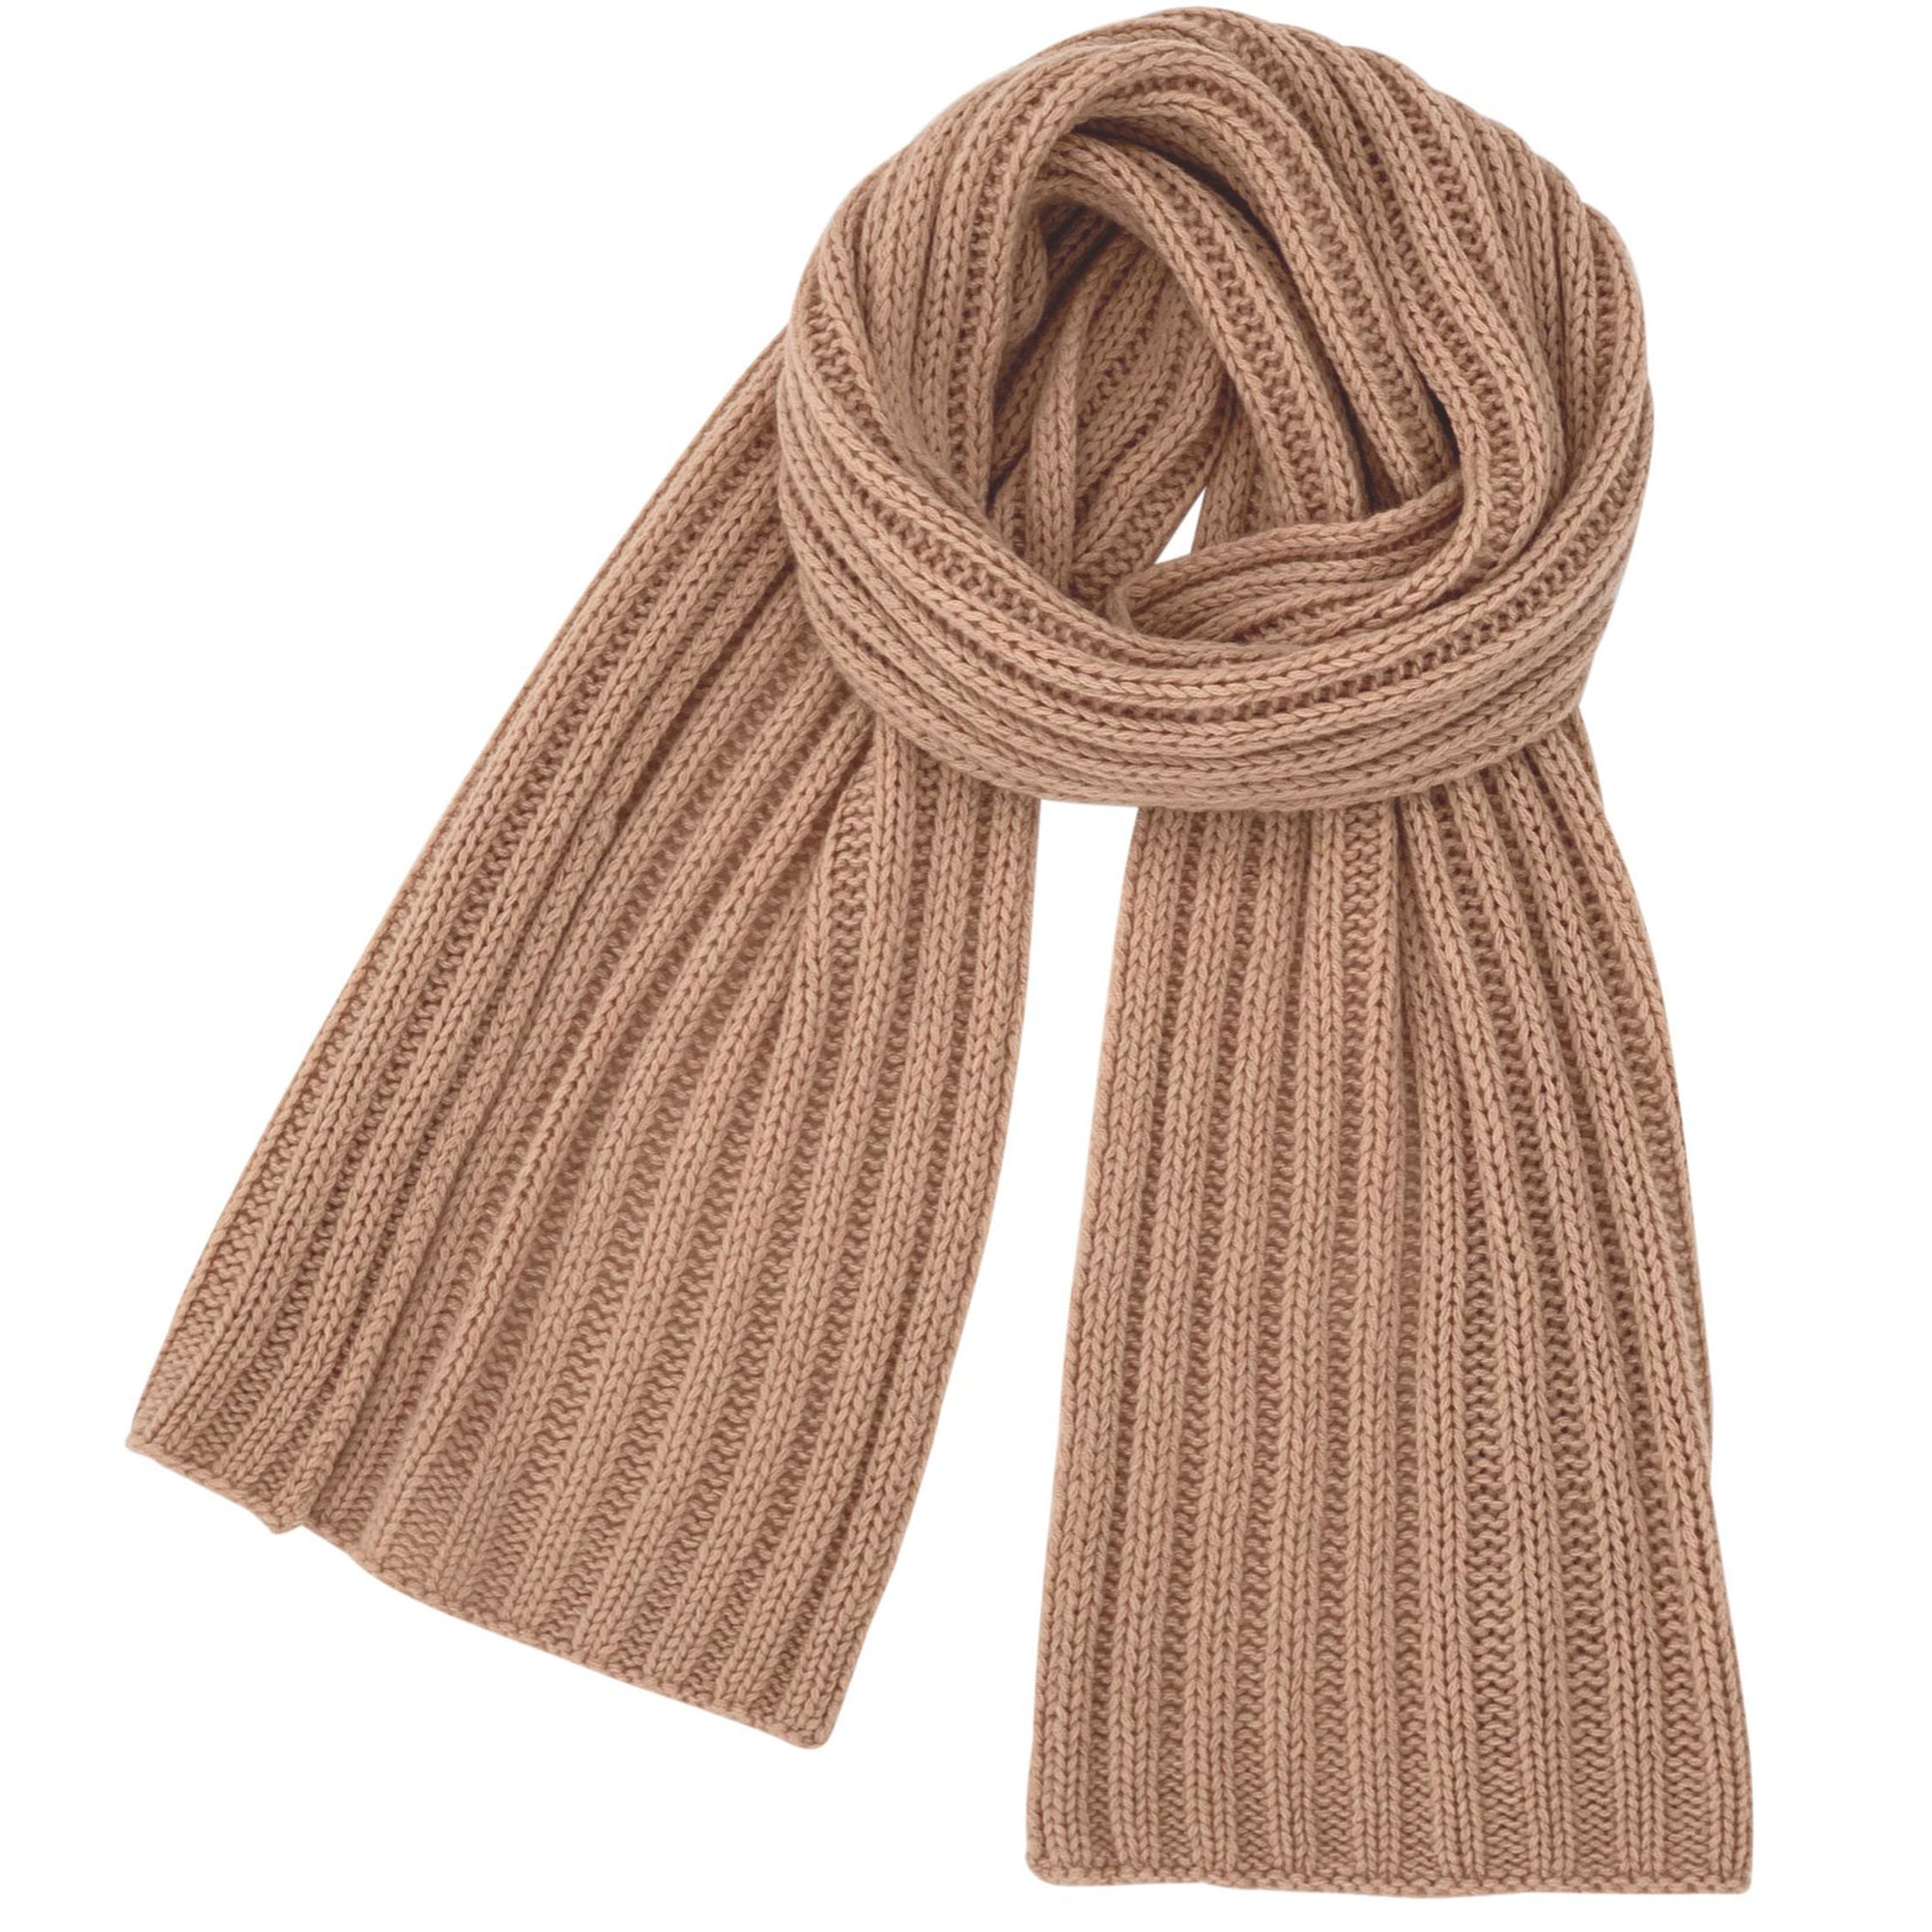 PETITE CALIN Kaschmirschal, Cashmere scarf, Camel, Beige, Sustainable cashmere, Kaschmir, Mütze, Handmade, Zero waste, Fair trade, Organic, Handcrafted, Handmade, Made in Europe, Made in Germany, Female Empowerment, Shop now - the wearness online-shop - ETHICAL & SUSTAINABLE LUXURY FASHION 